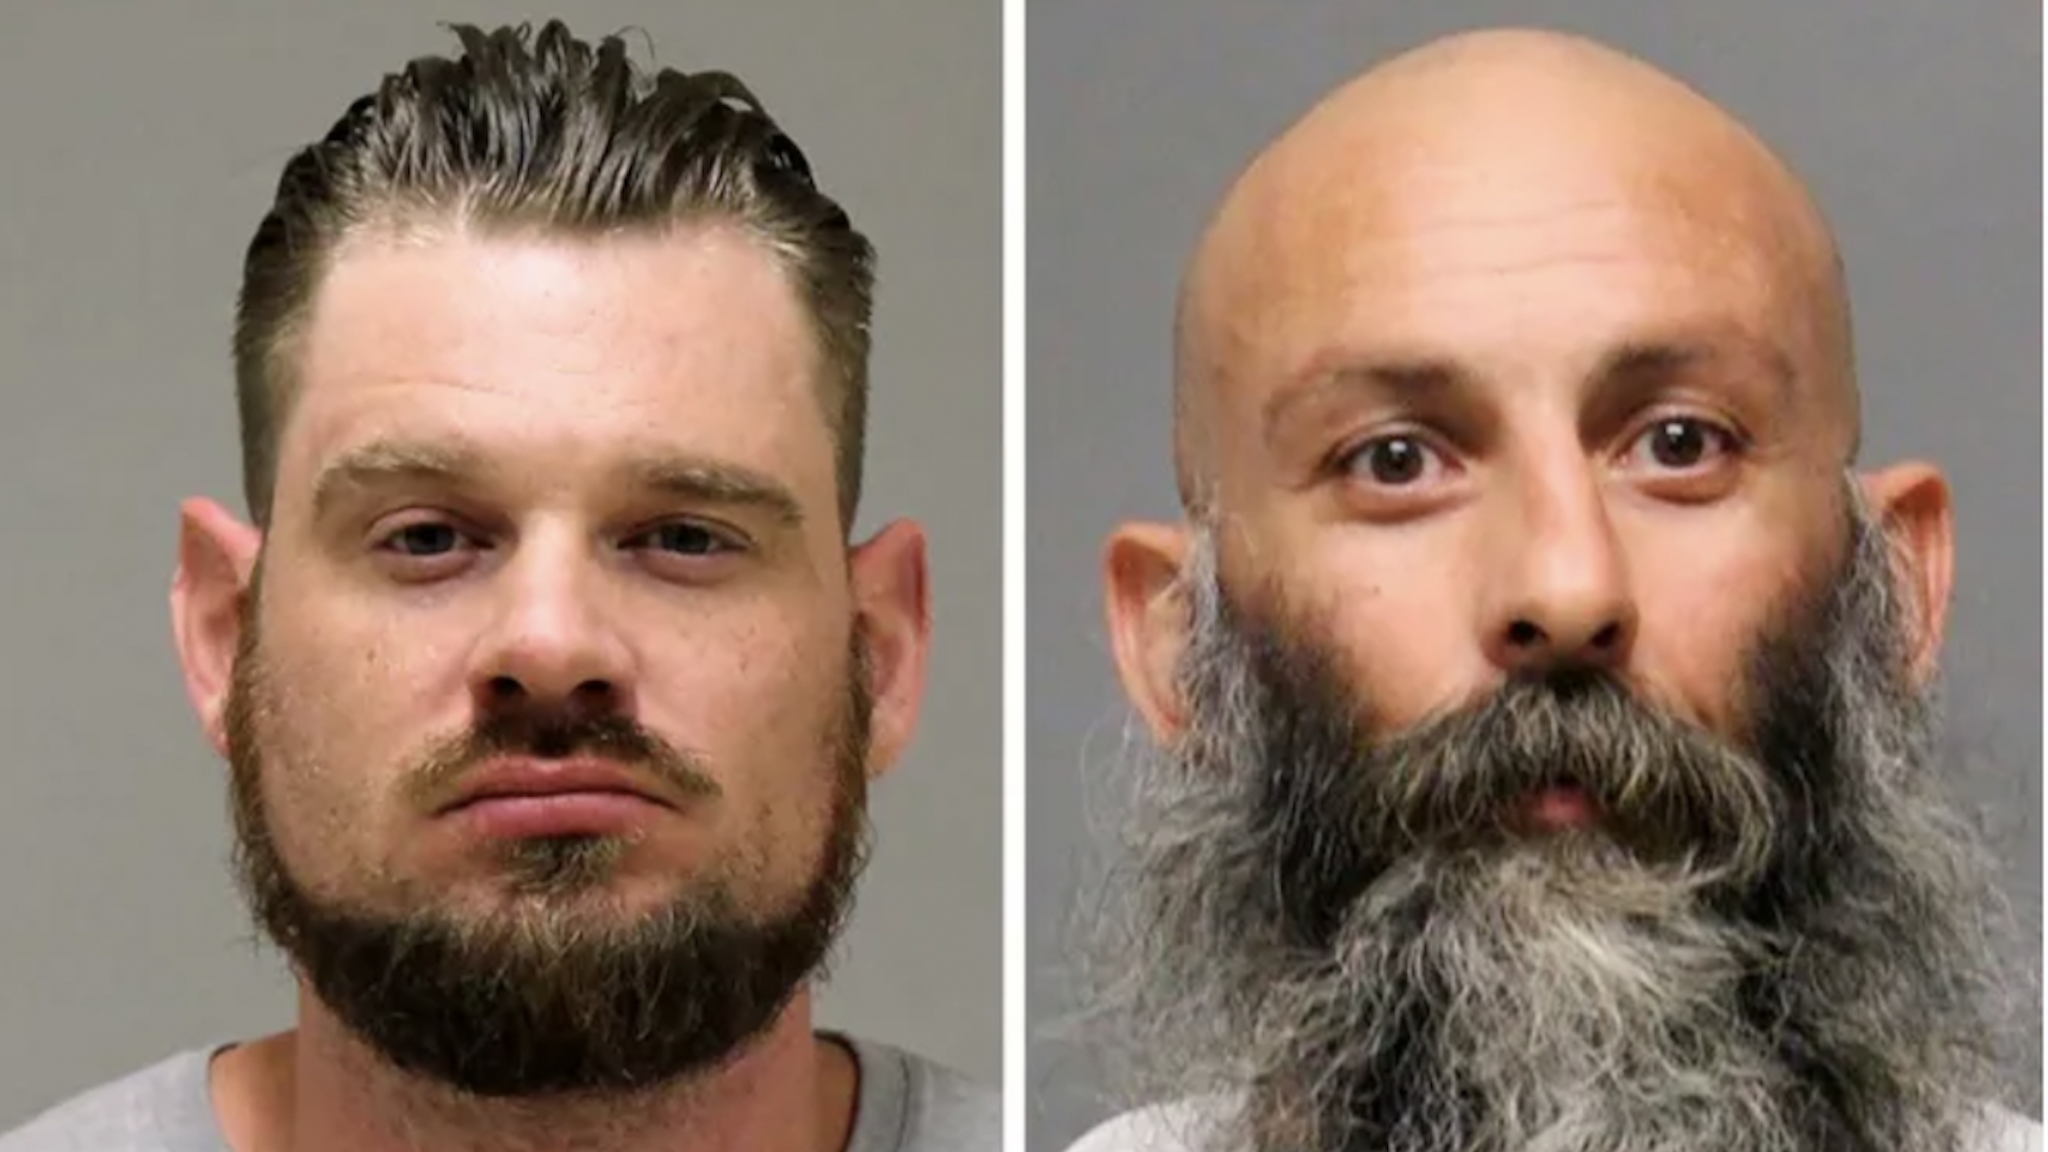 Adam Fox, (l.), and Barry Croft, (r.), must stand trial again in the alleged plot to kidnap Michigan Gov. Gretchen Whitmer.